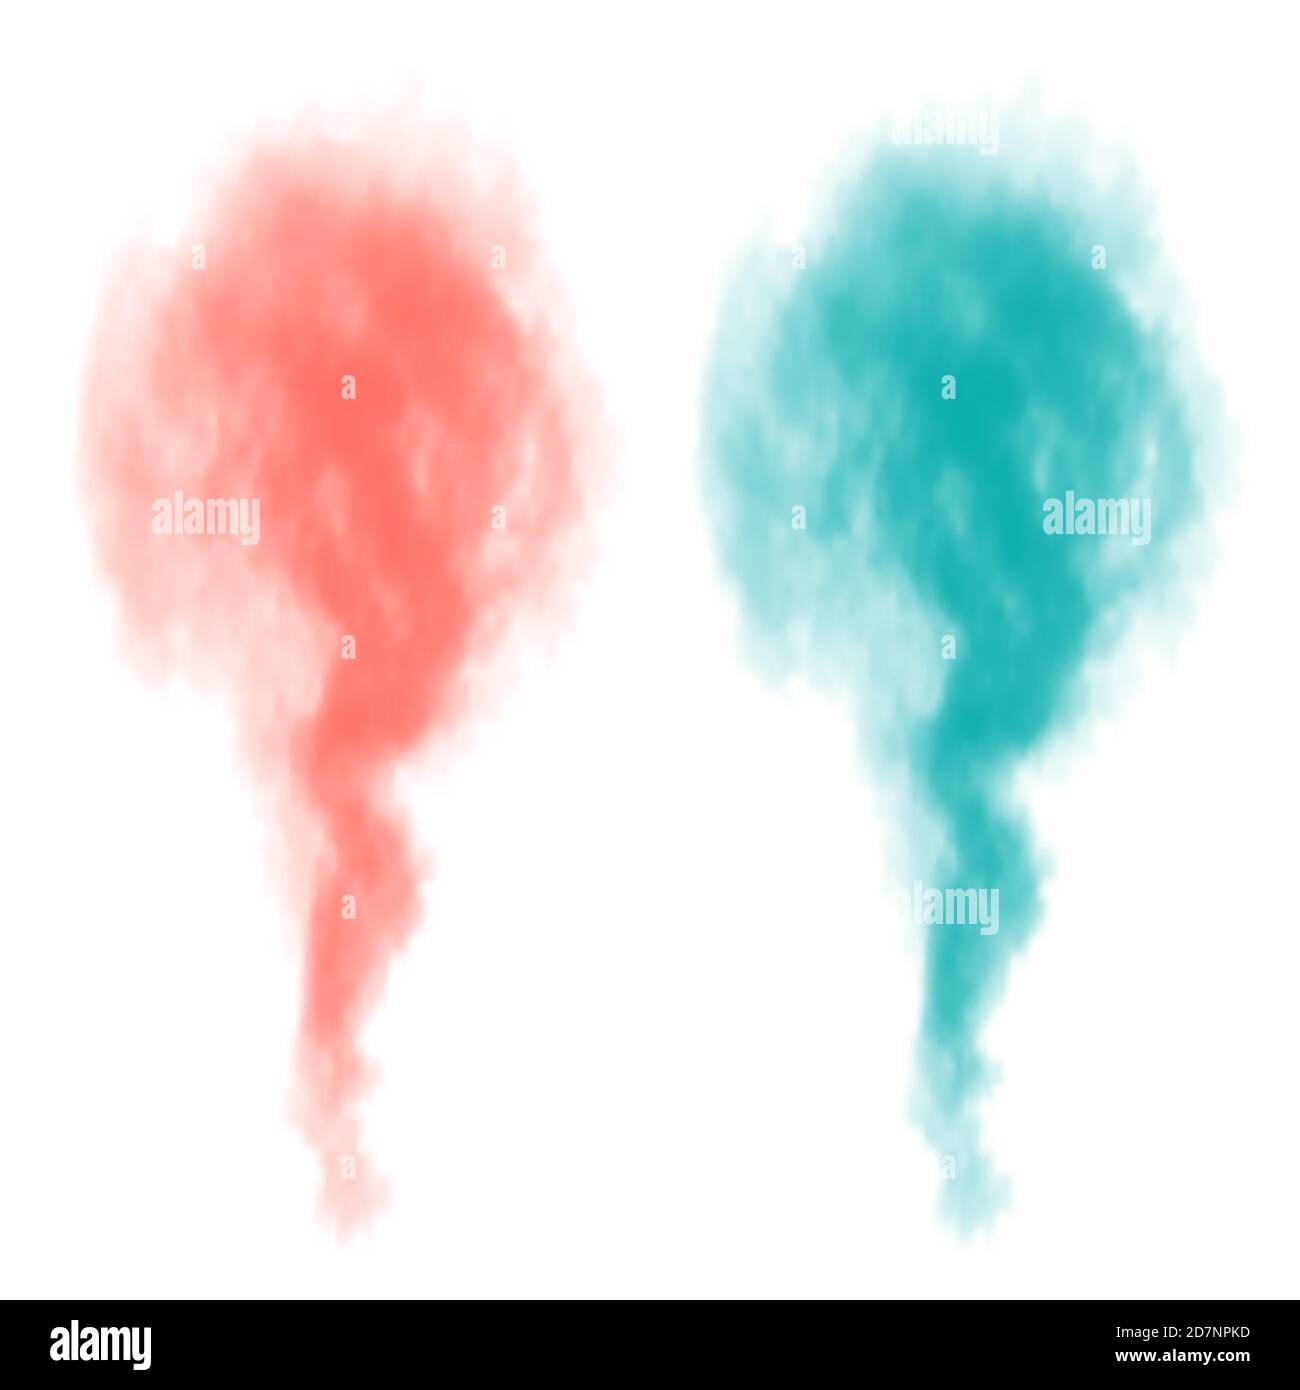 Pink and Blue Smoke Bombs Overlays - Design Cuts